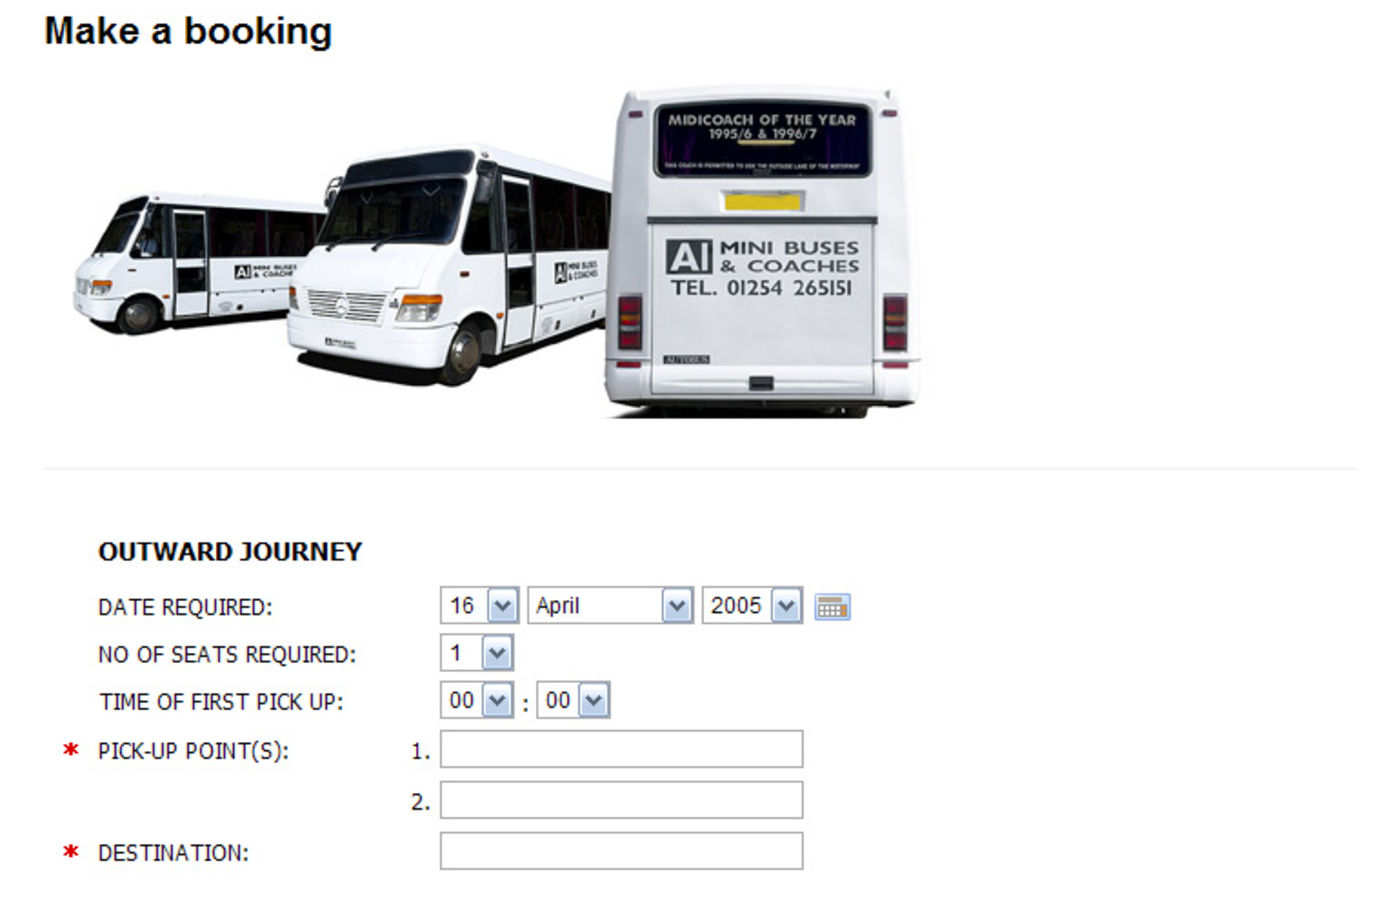 A1 Minibuses and Coaches Booking header - A1 Minibuses and Coaches